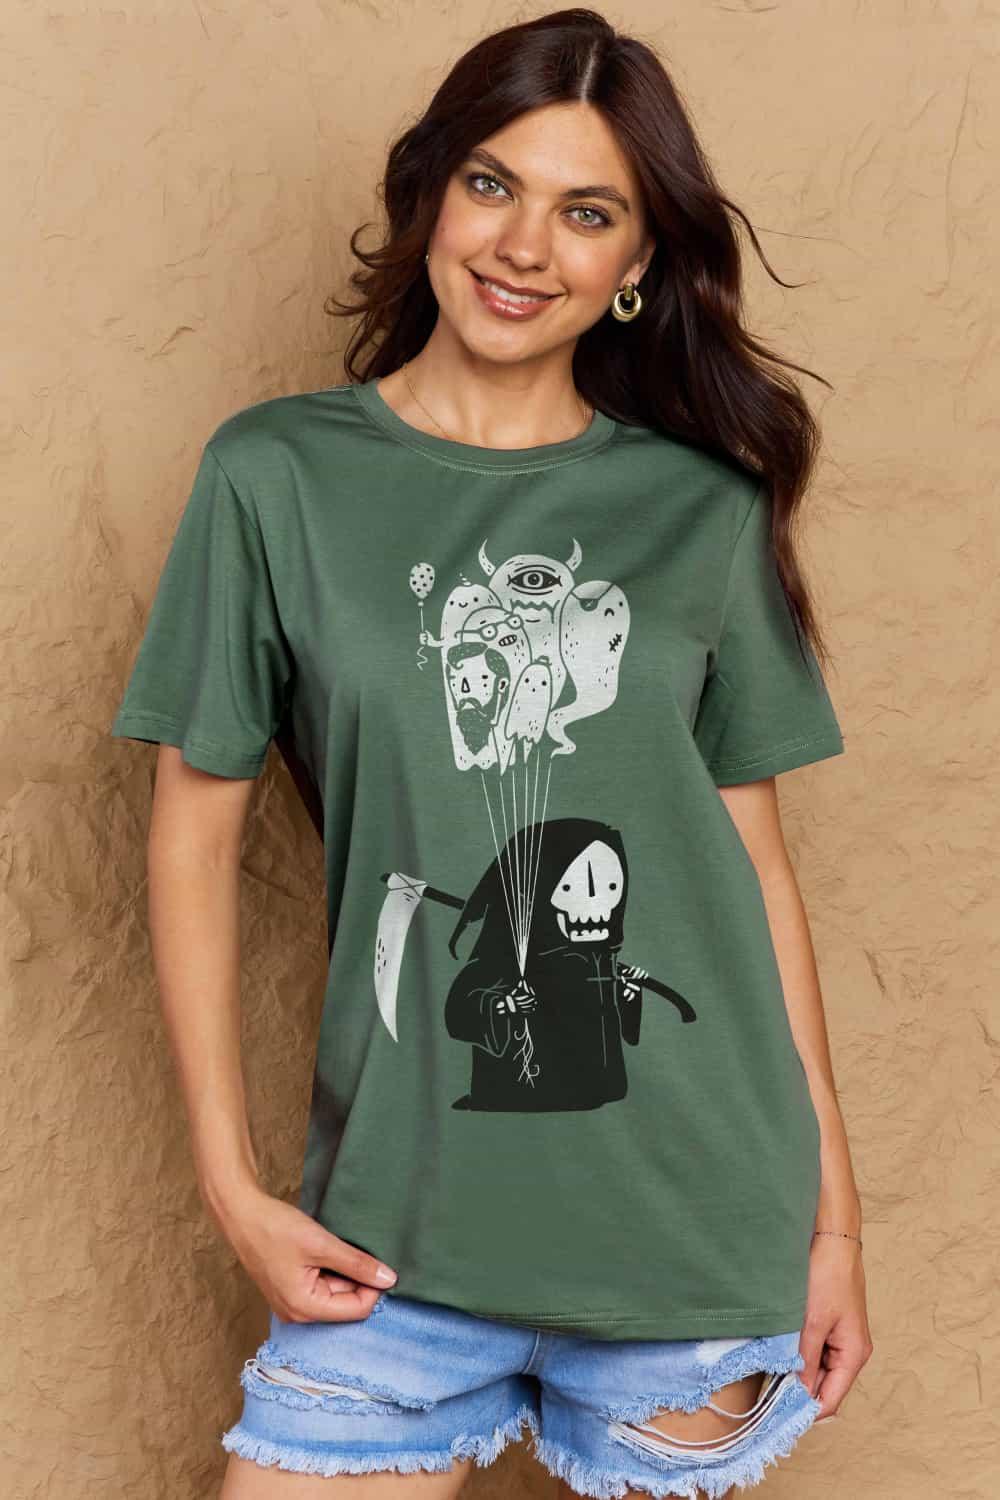 Simply Love Full Size Death Graphic T-Shirt - Vesteeto